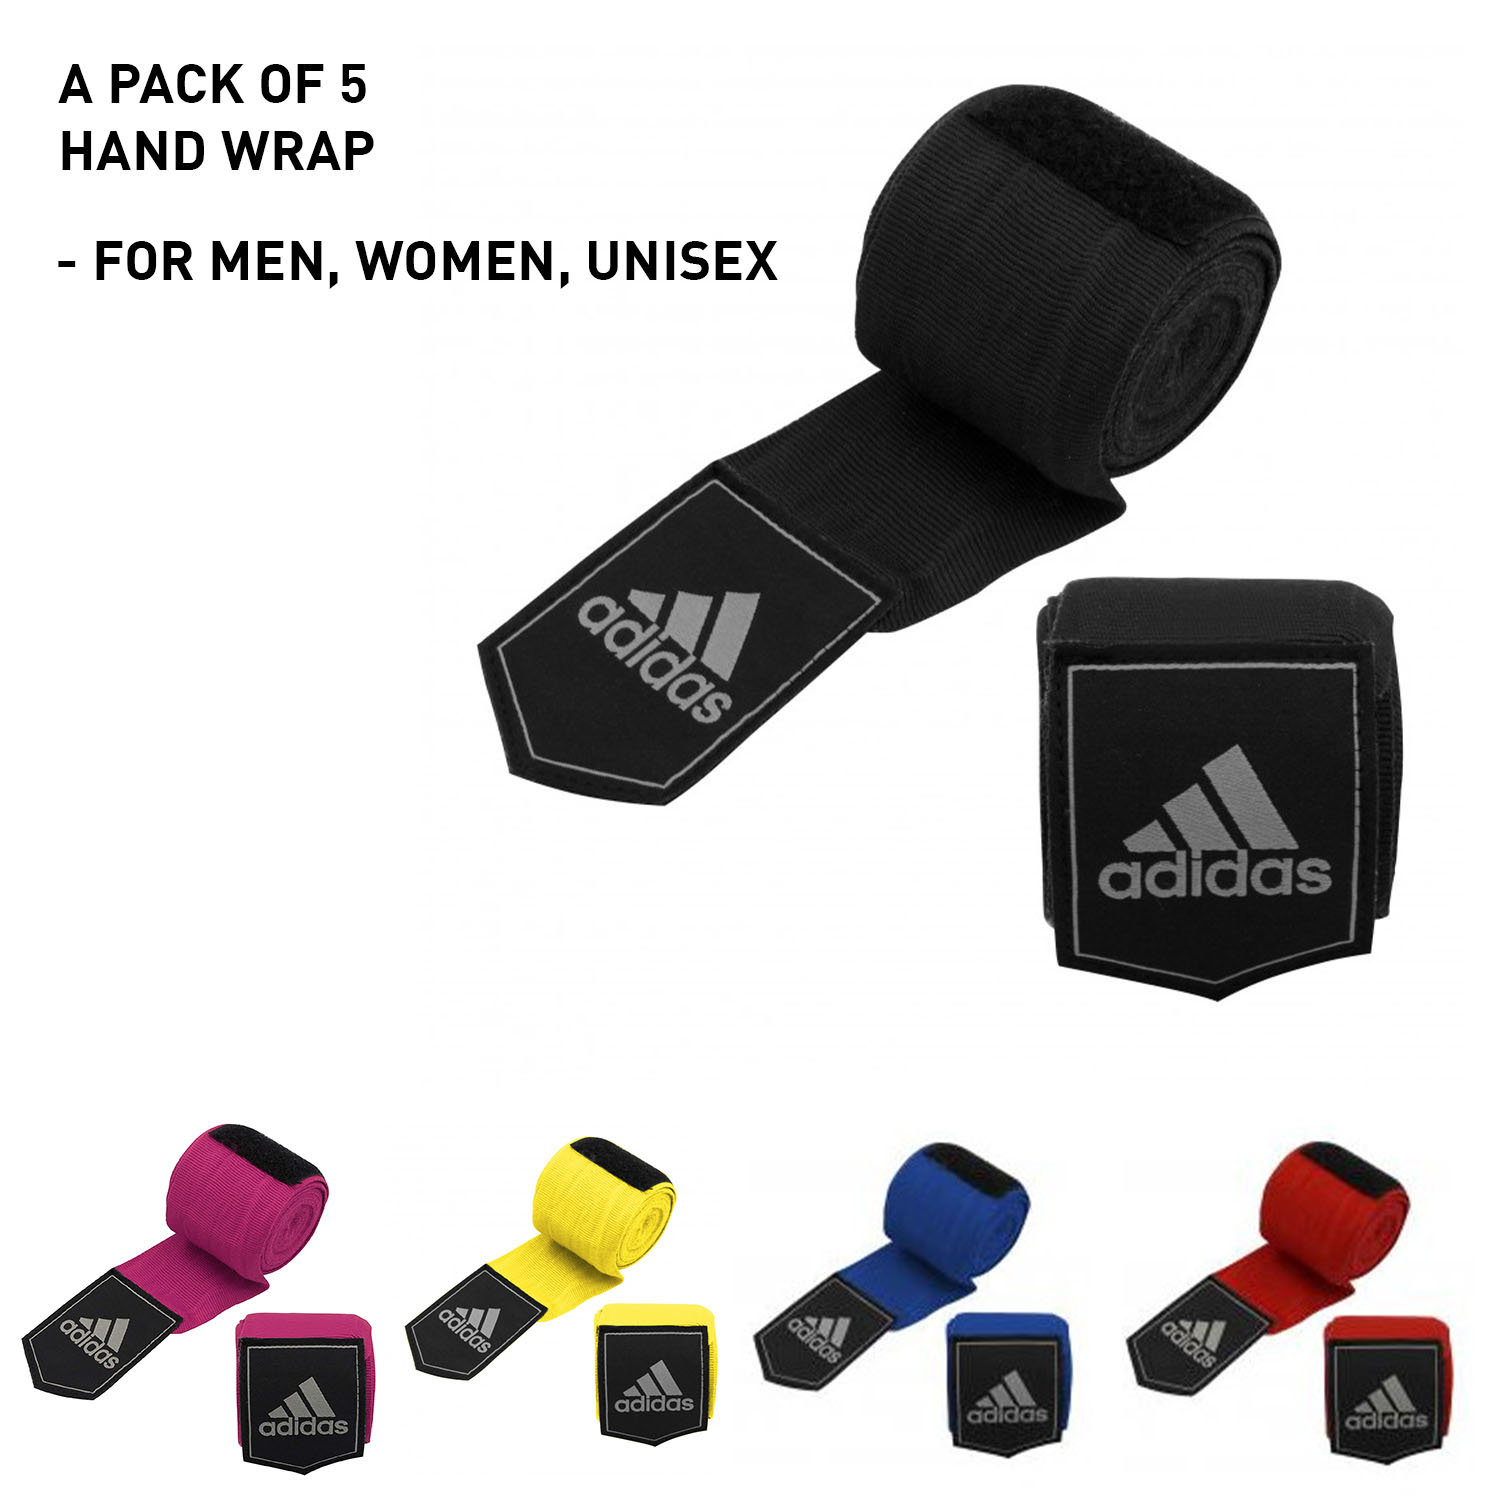 adidas Protective Boxing Hand Wraps – Pack of 5 pairs Bundle Deal